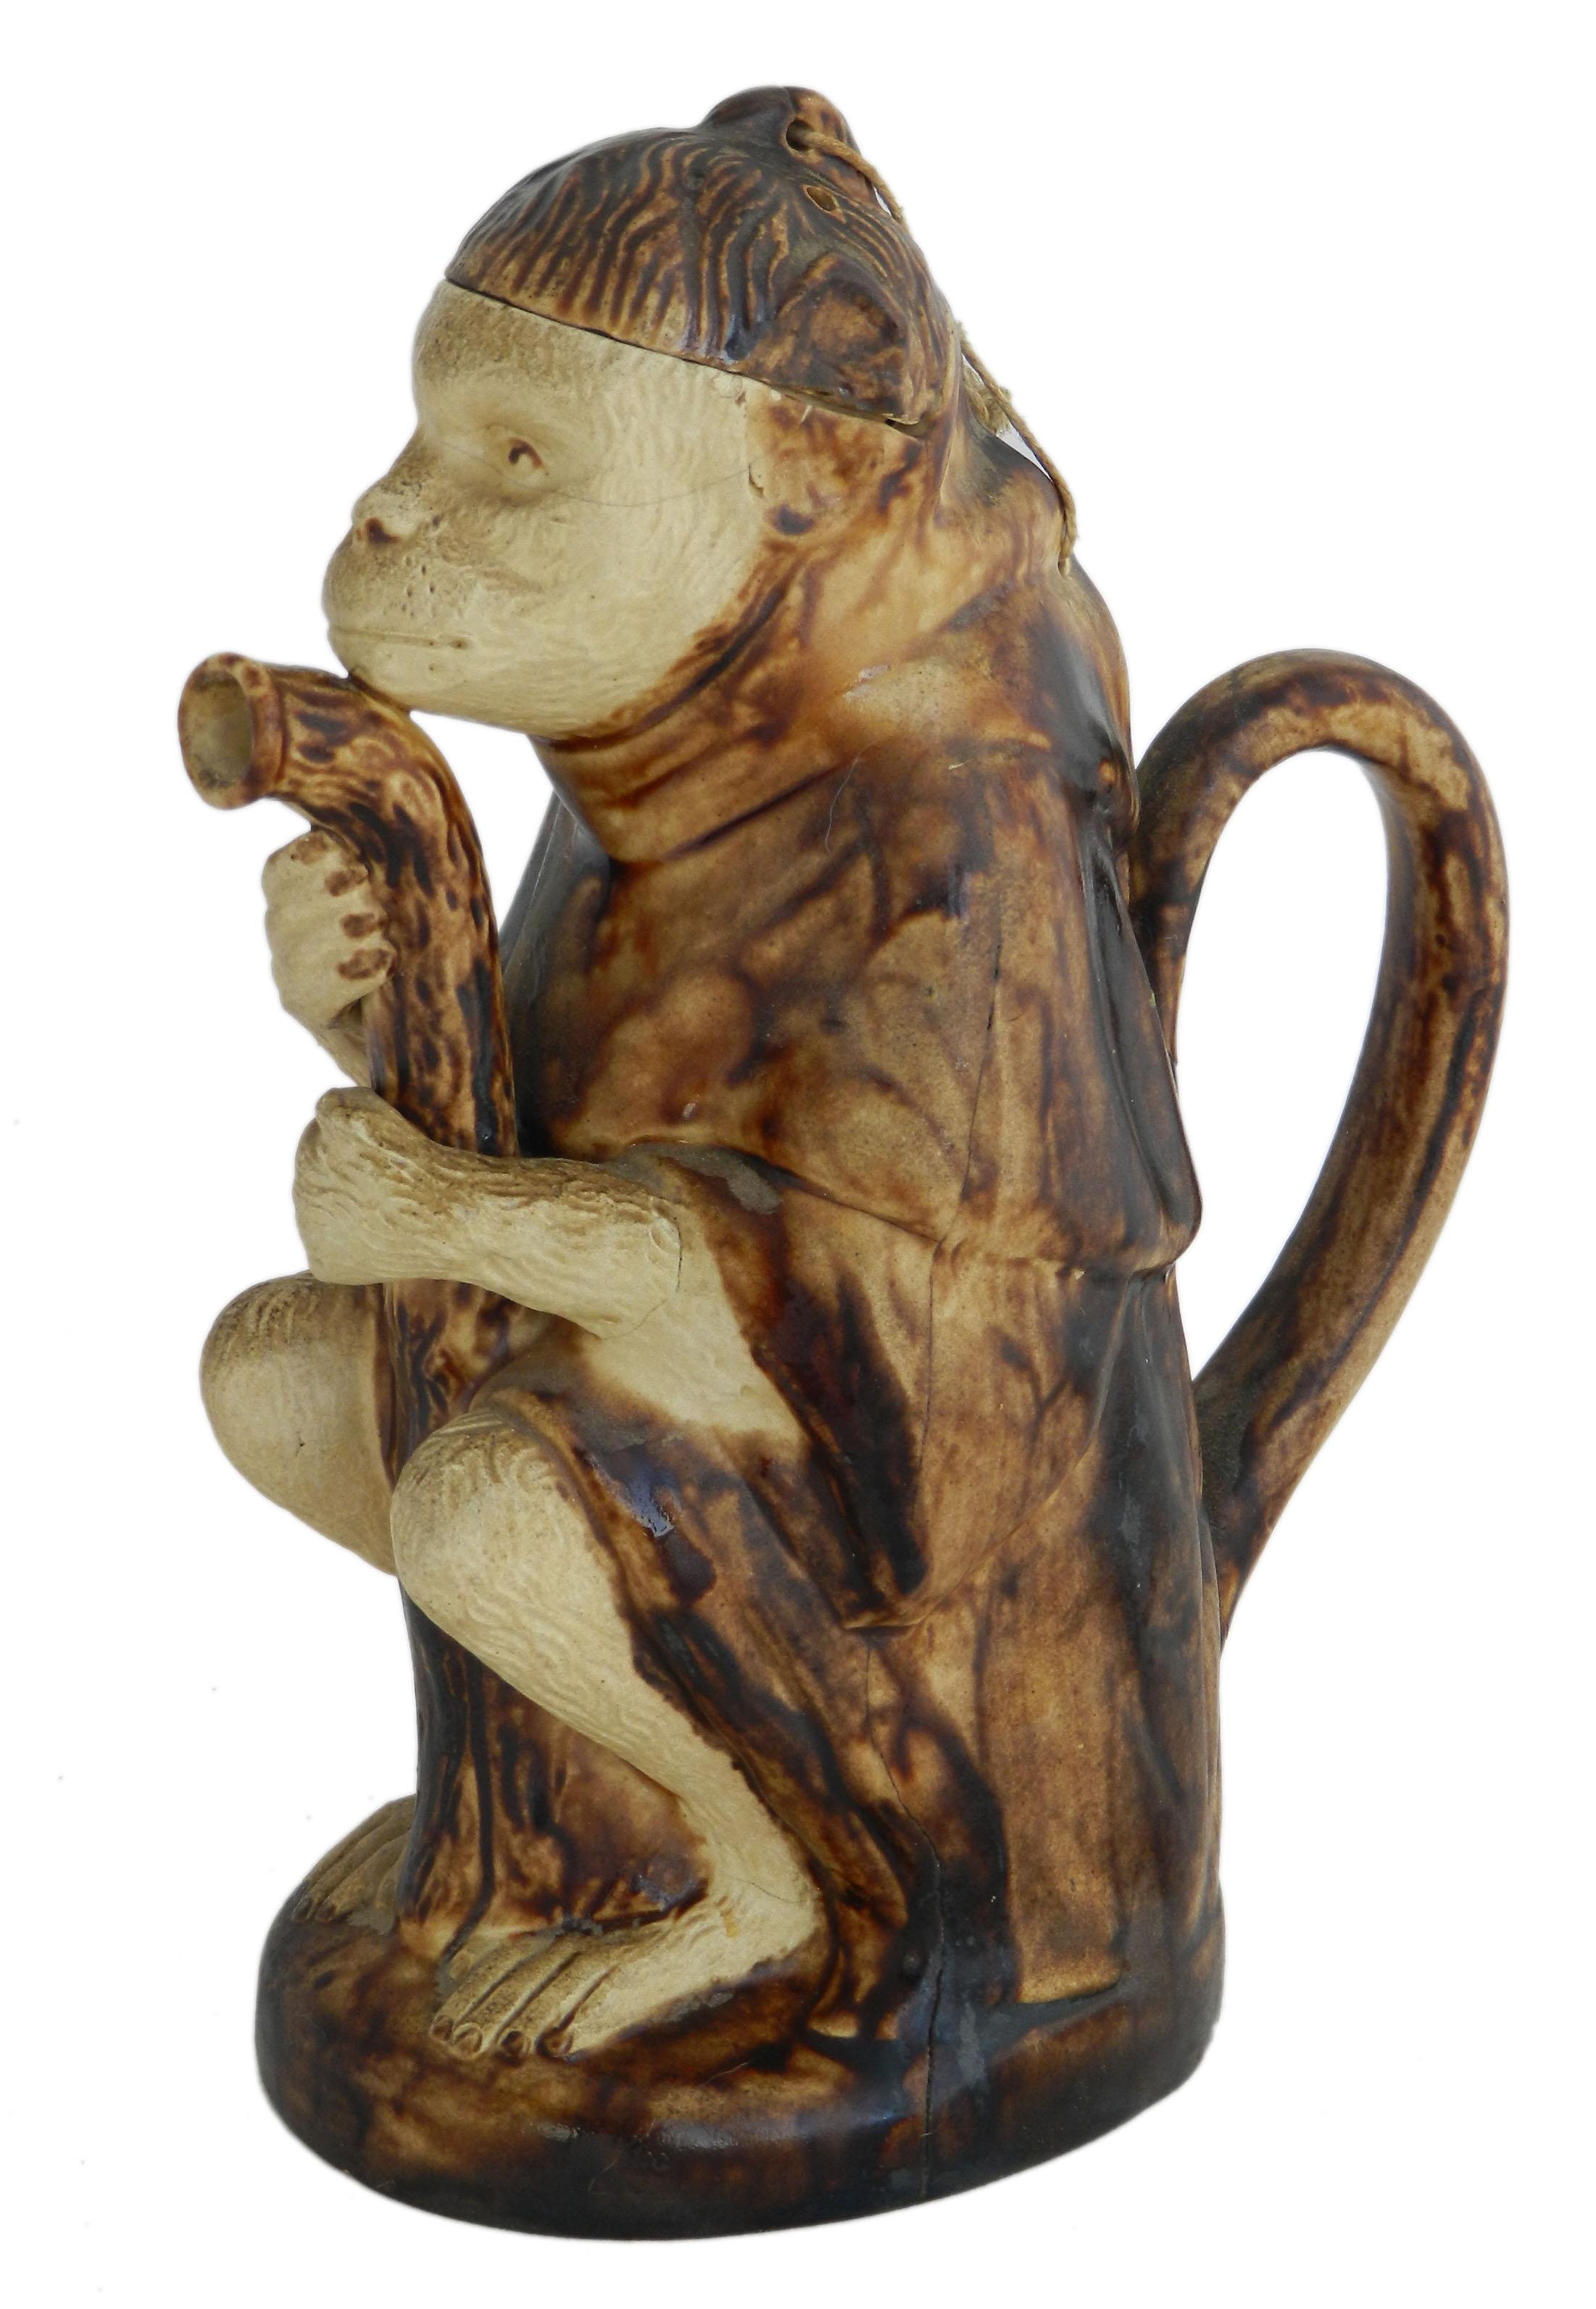 Antique Monkey Pitcher or Jar by Bodlet Vaudancourt 1840
Very rare pottery from France 
Very good Antique Condition with minor marks to the neck as shown
Vaudancourt is in Marne with connection to Sevres





  